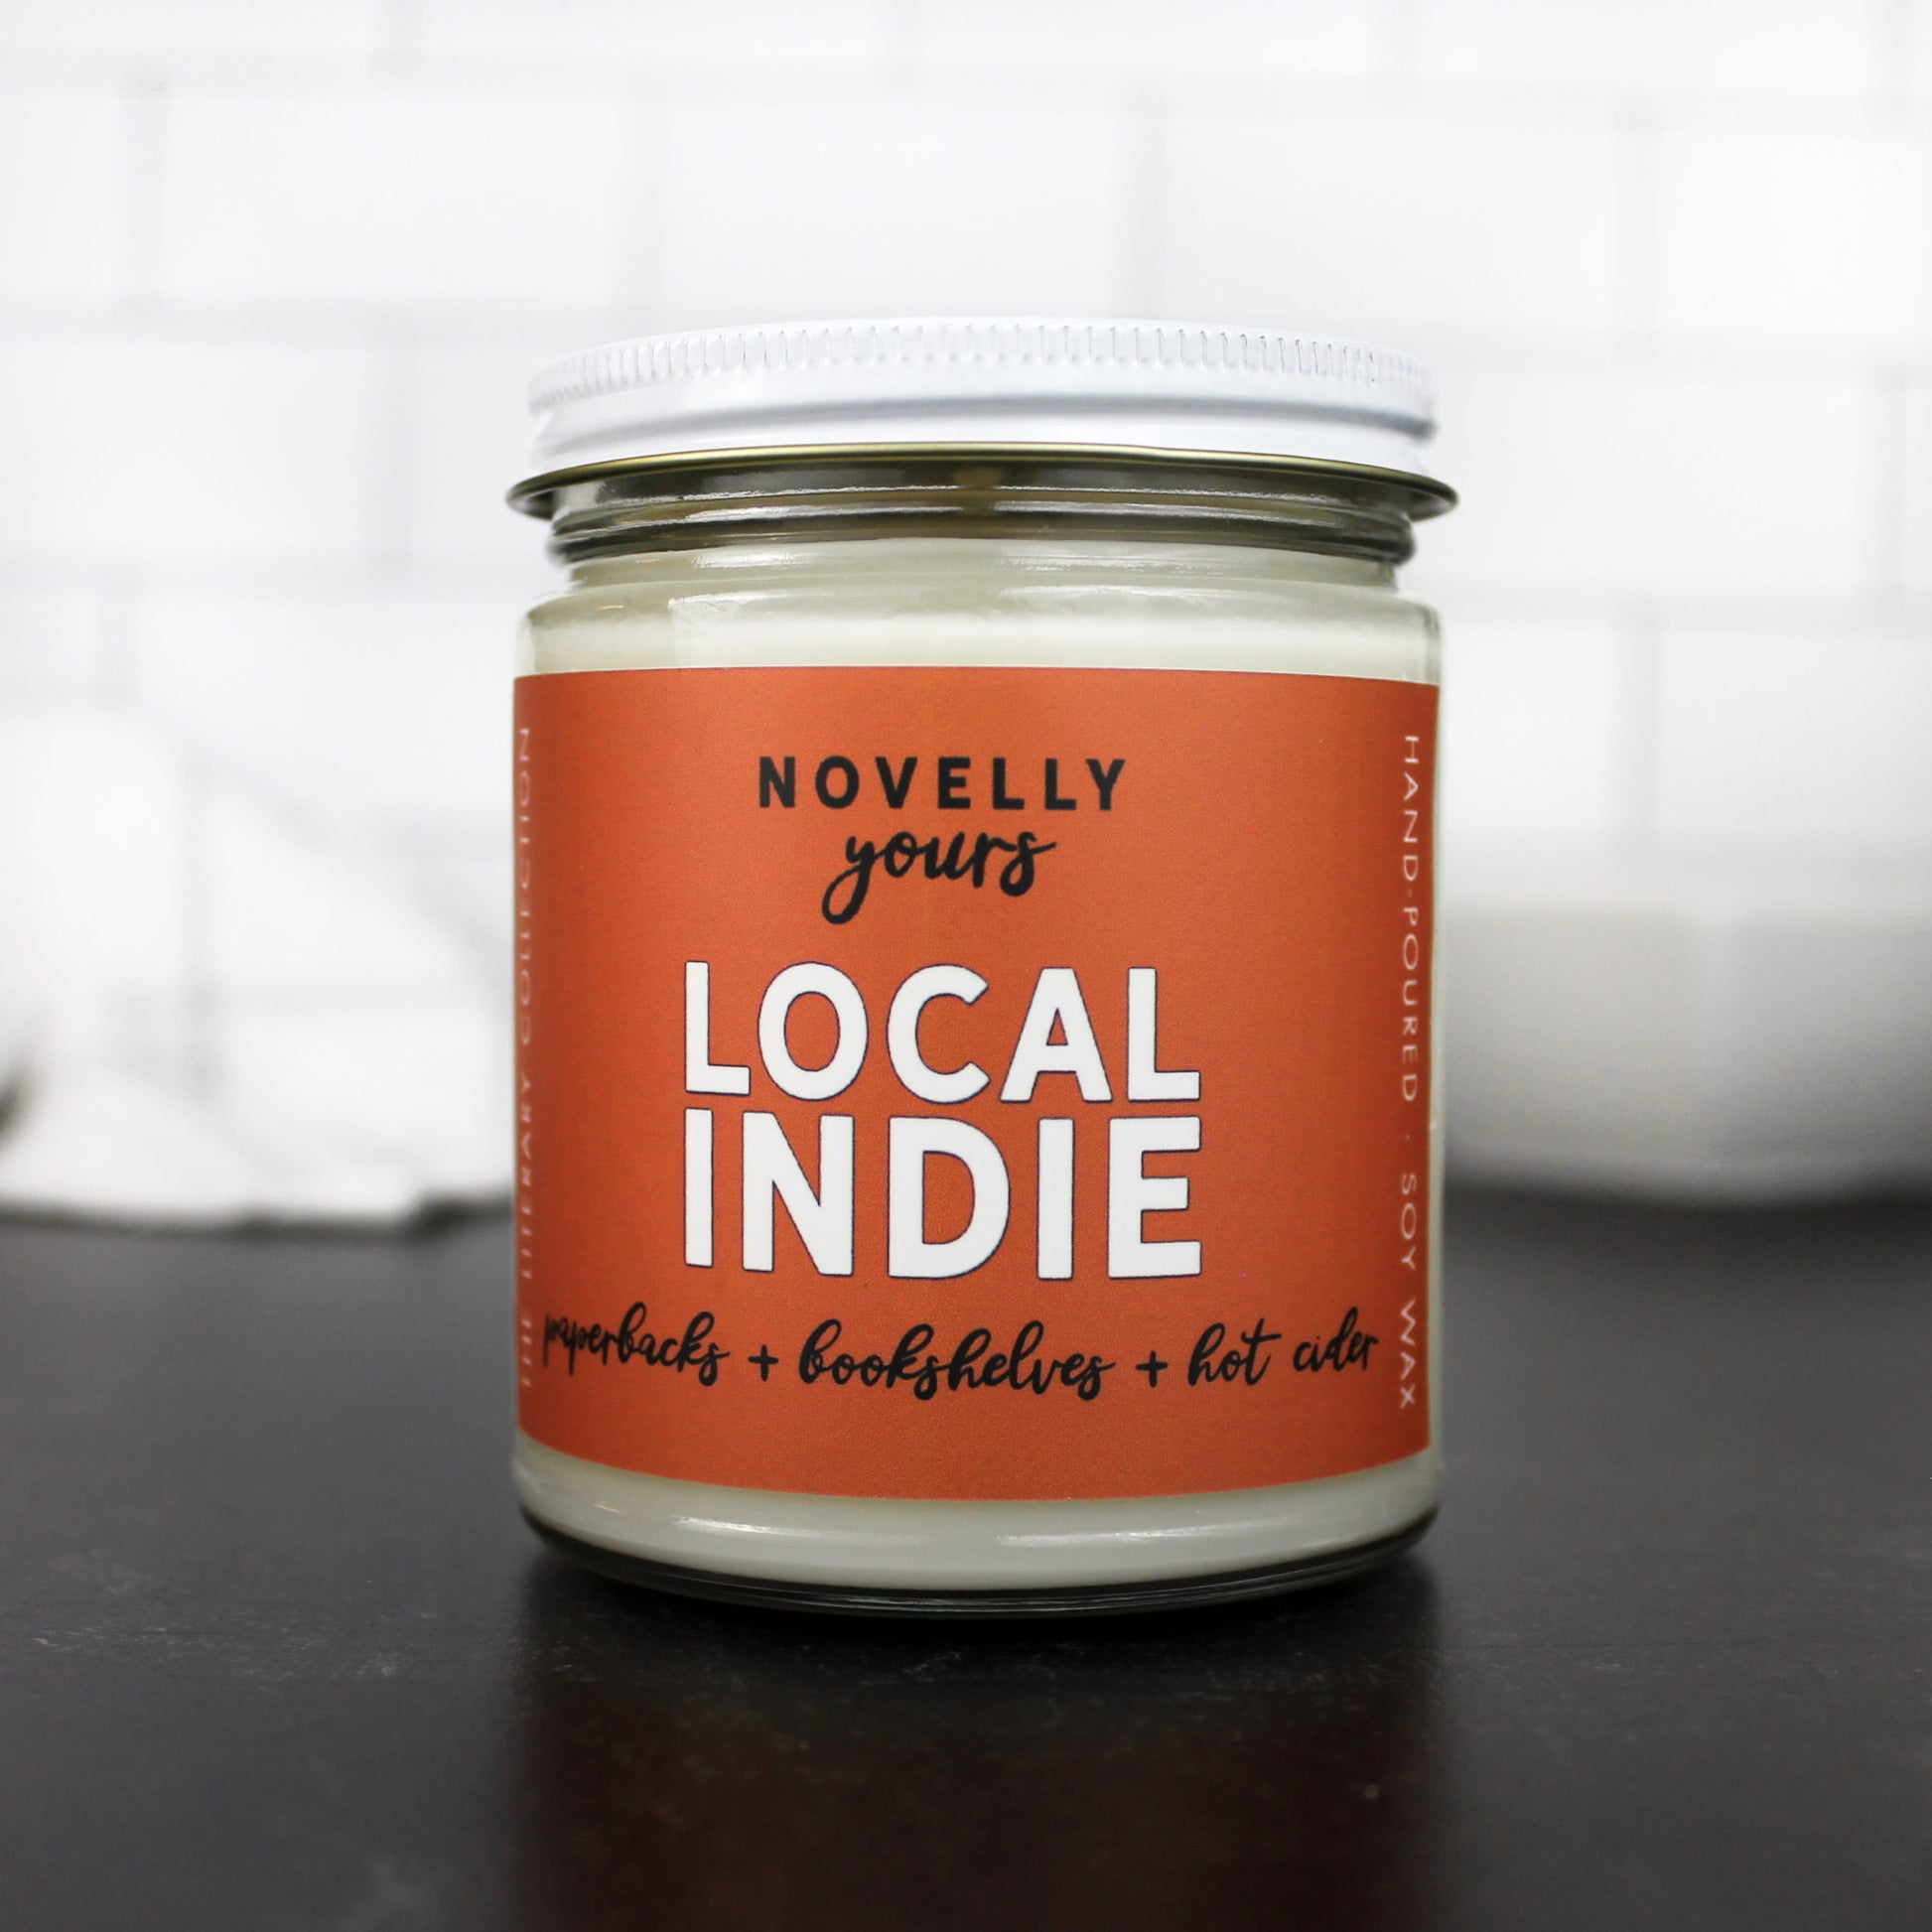 Local indie scented soy wax candle with burnt orange label in clear glass jar with white lid